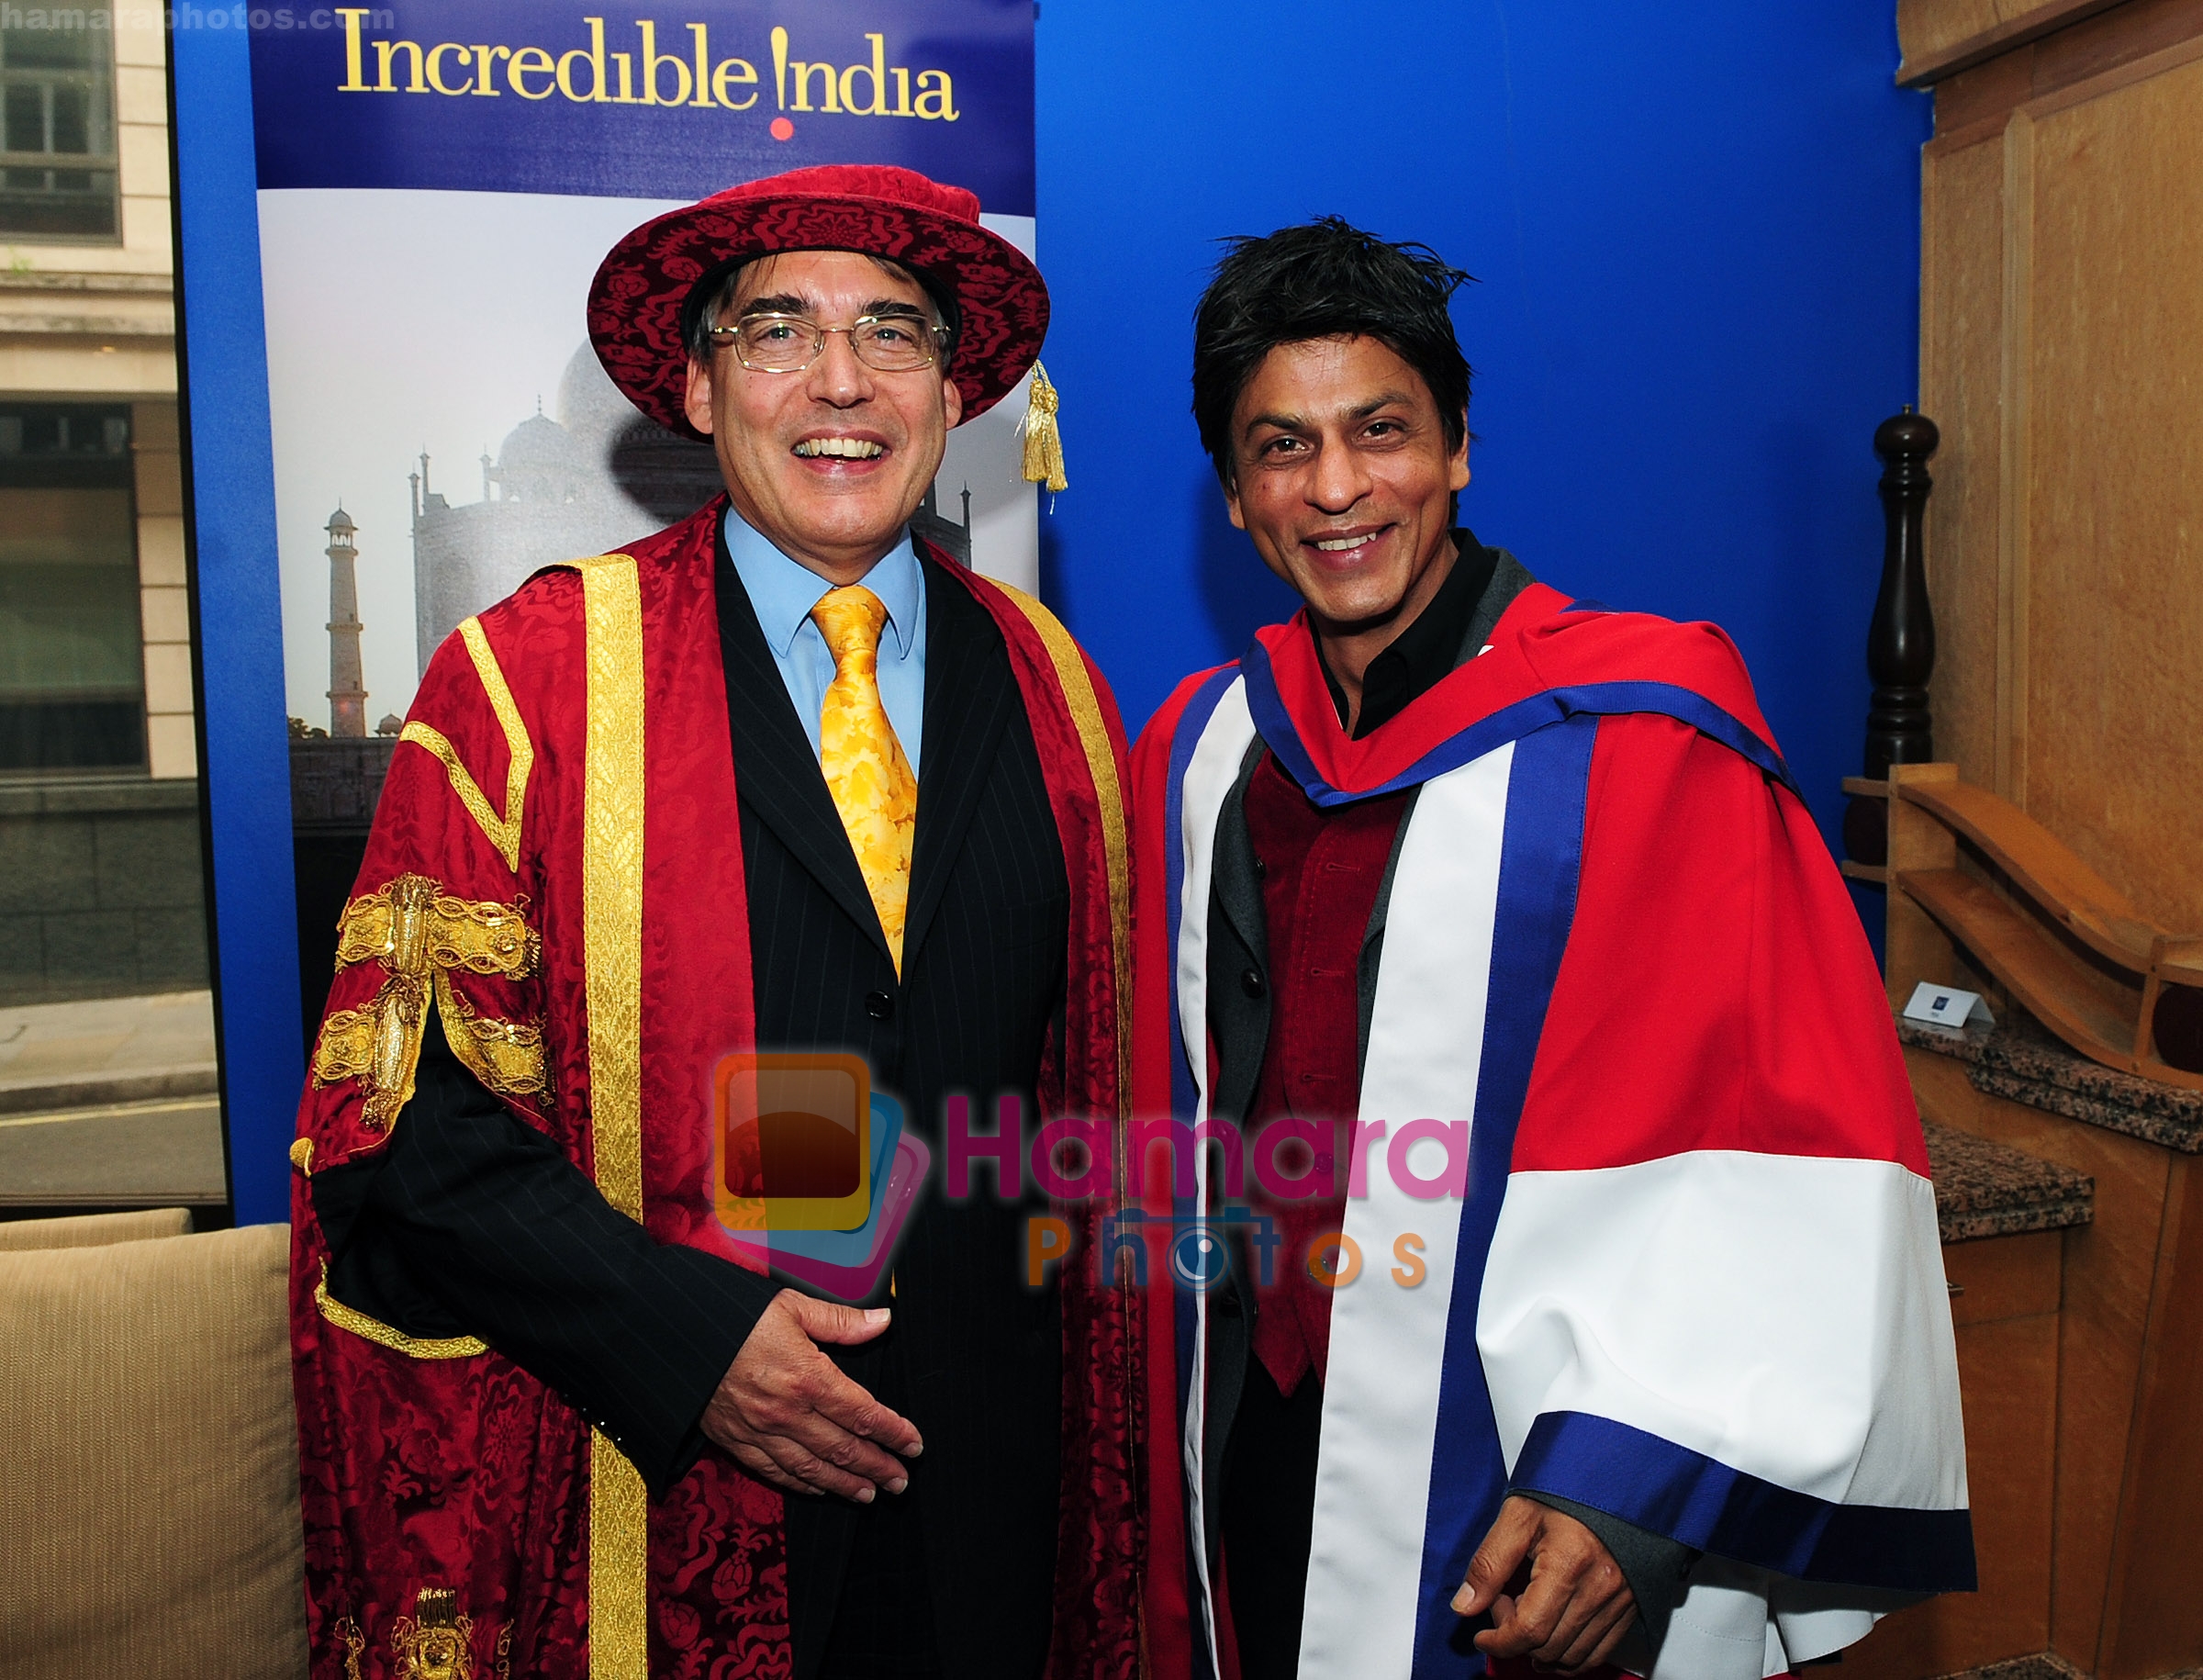 Shah Rukh Shah with his honorary doctorate in University of Bedfordshire on 10th July 2009 